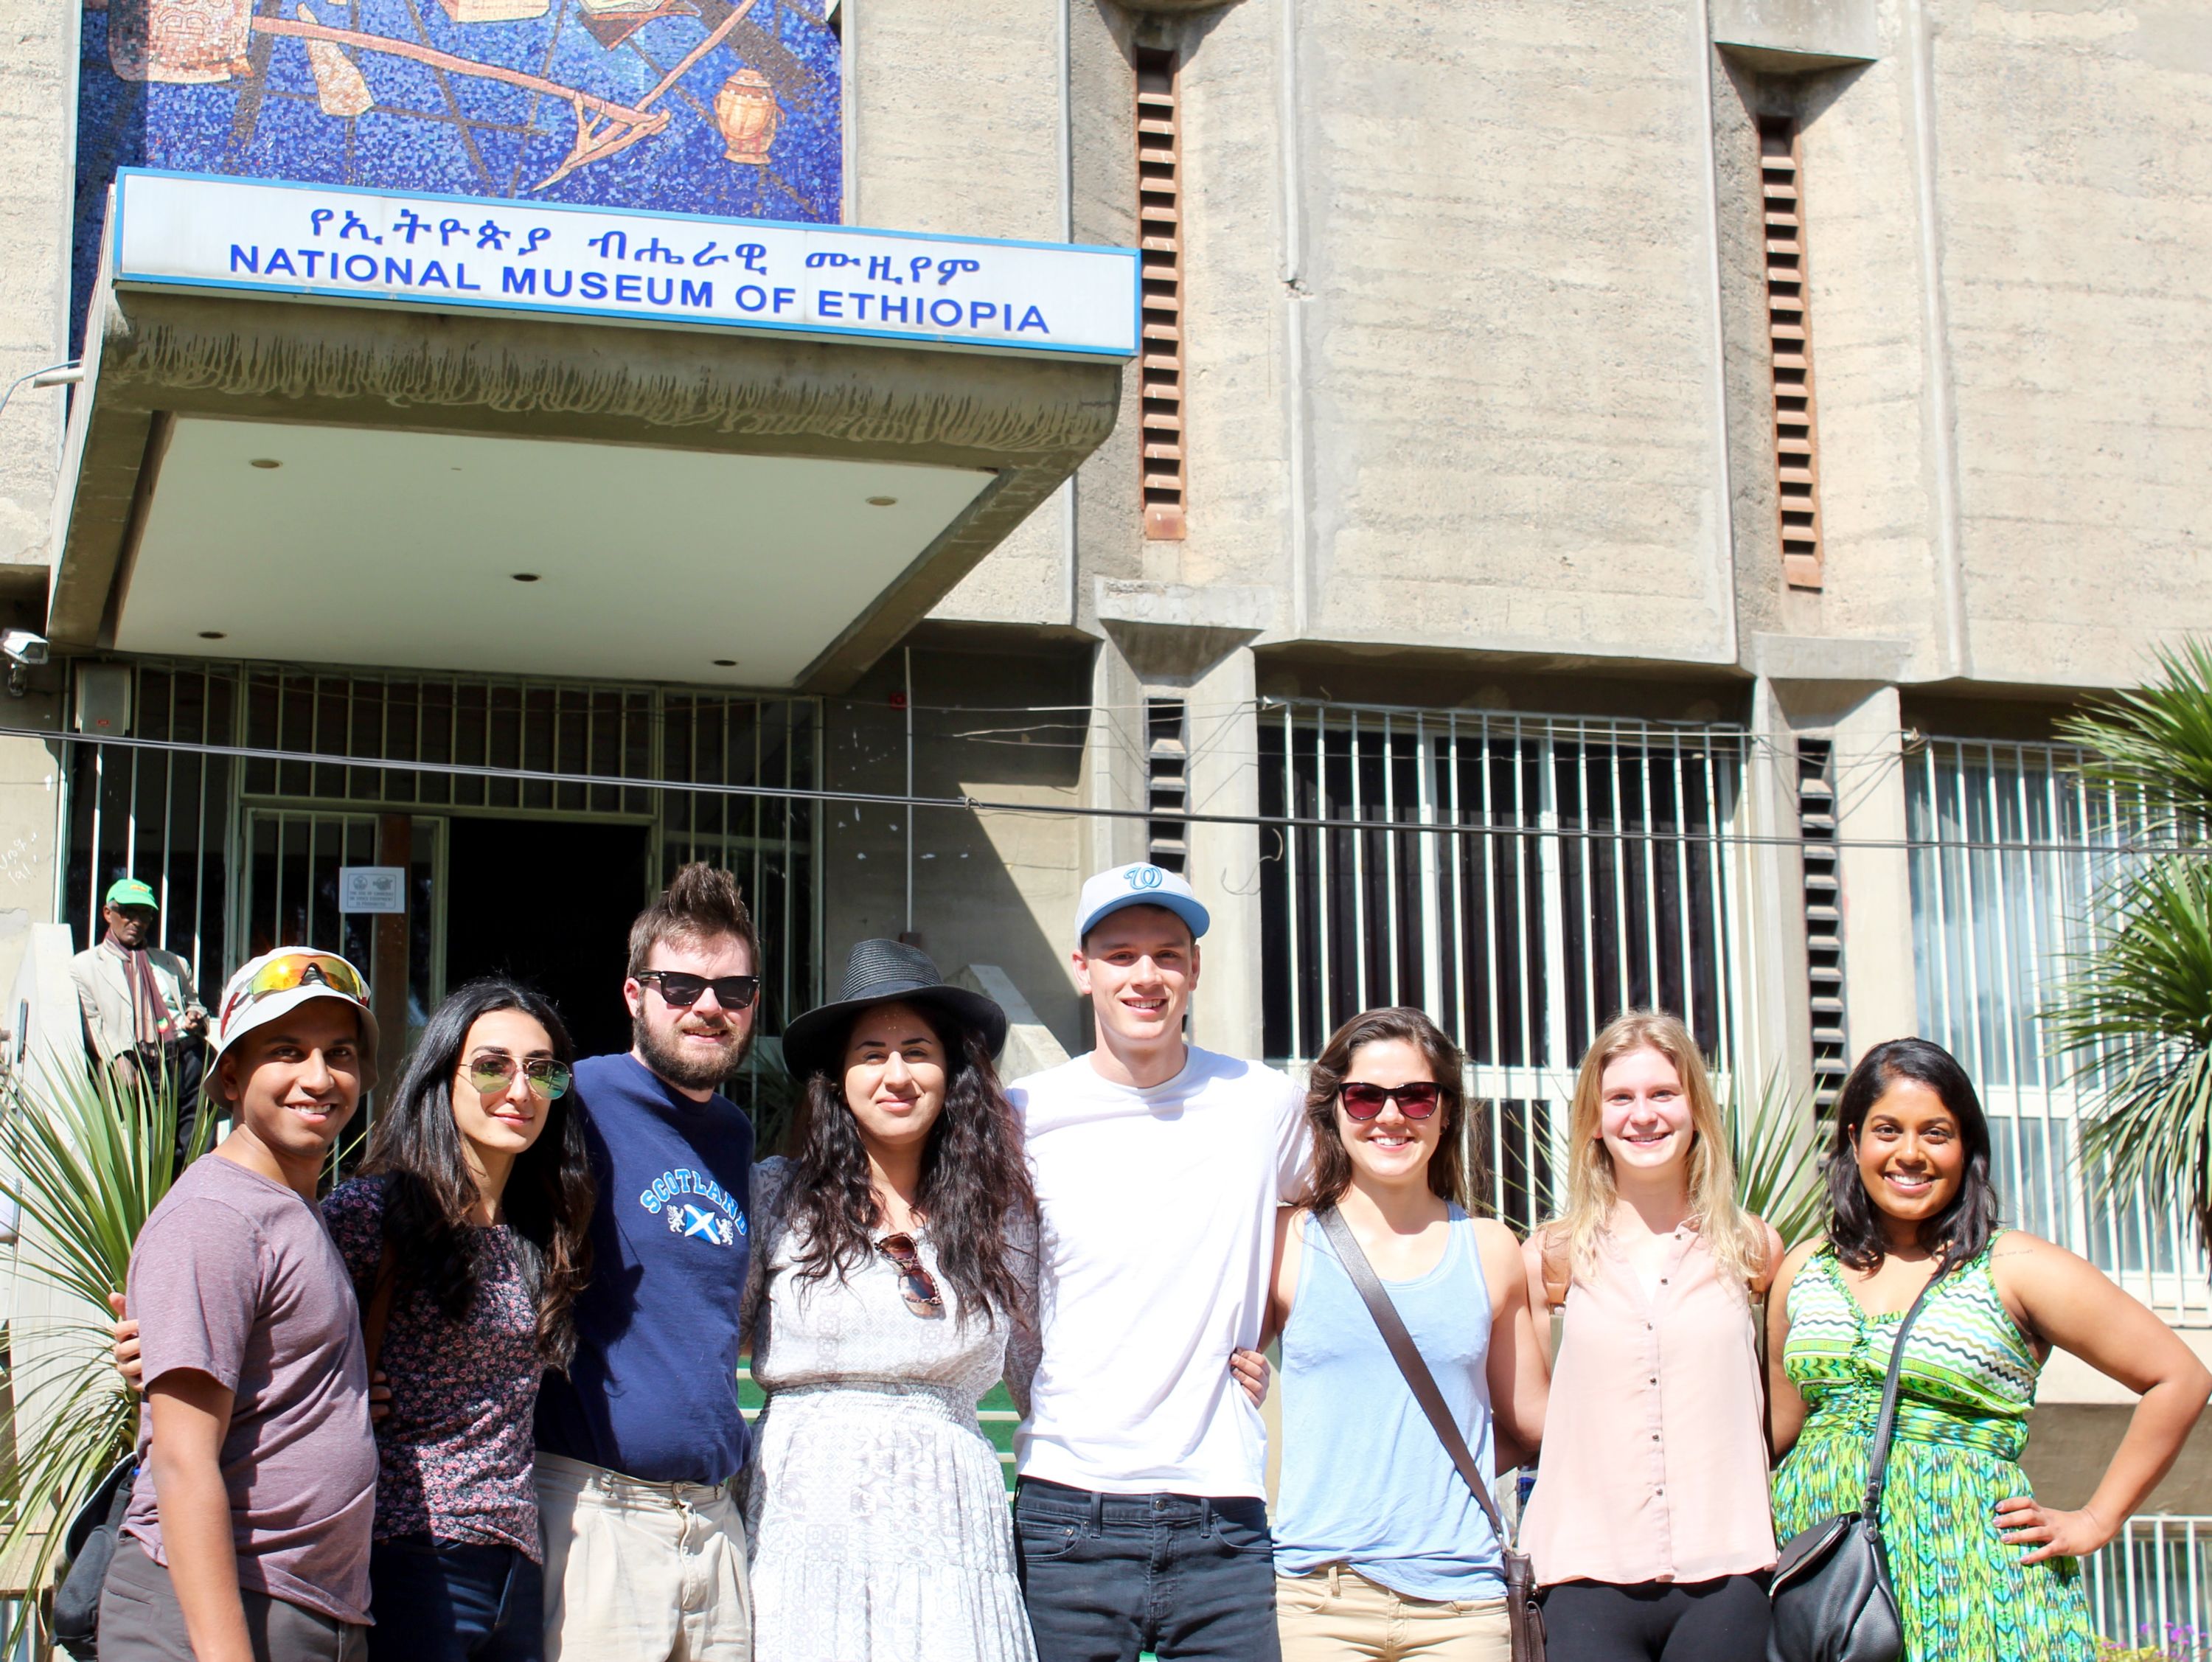 King's Political Science students at the National Museum of Ethiopia 